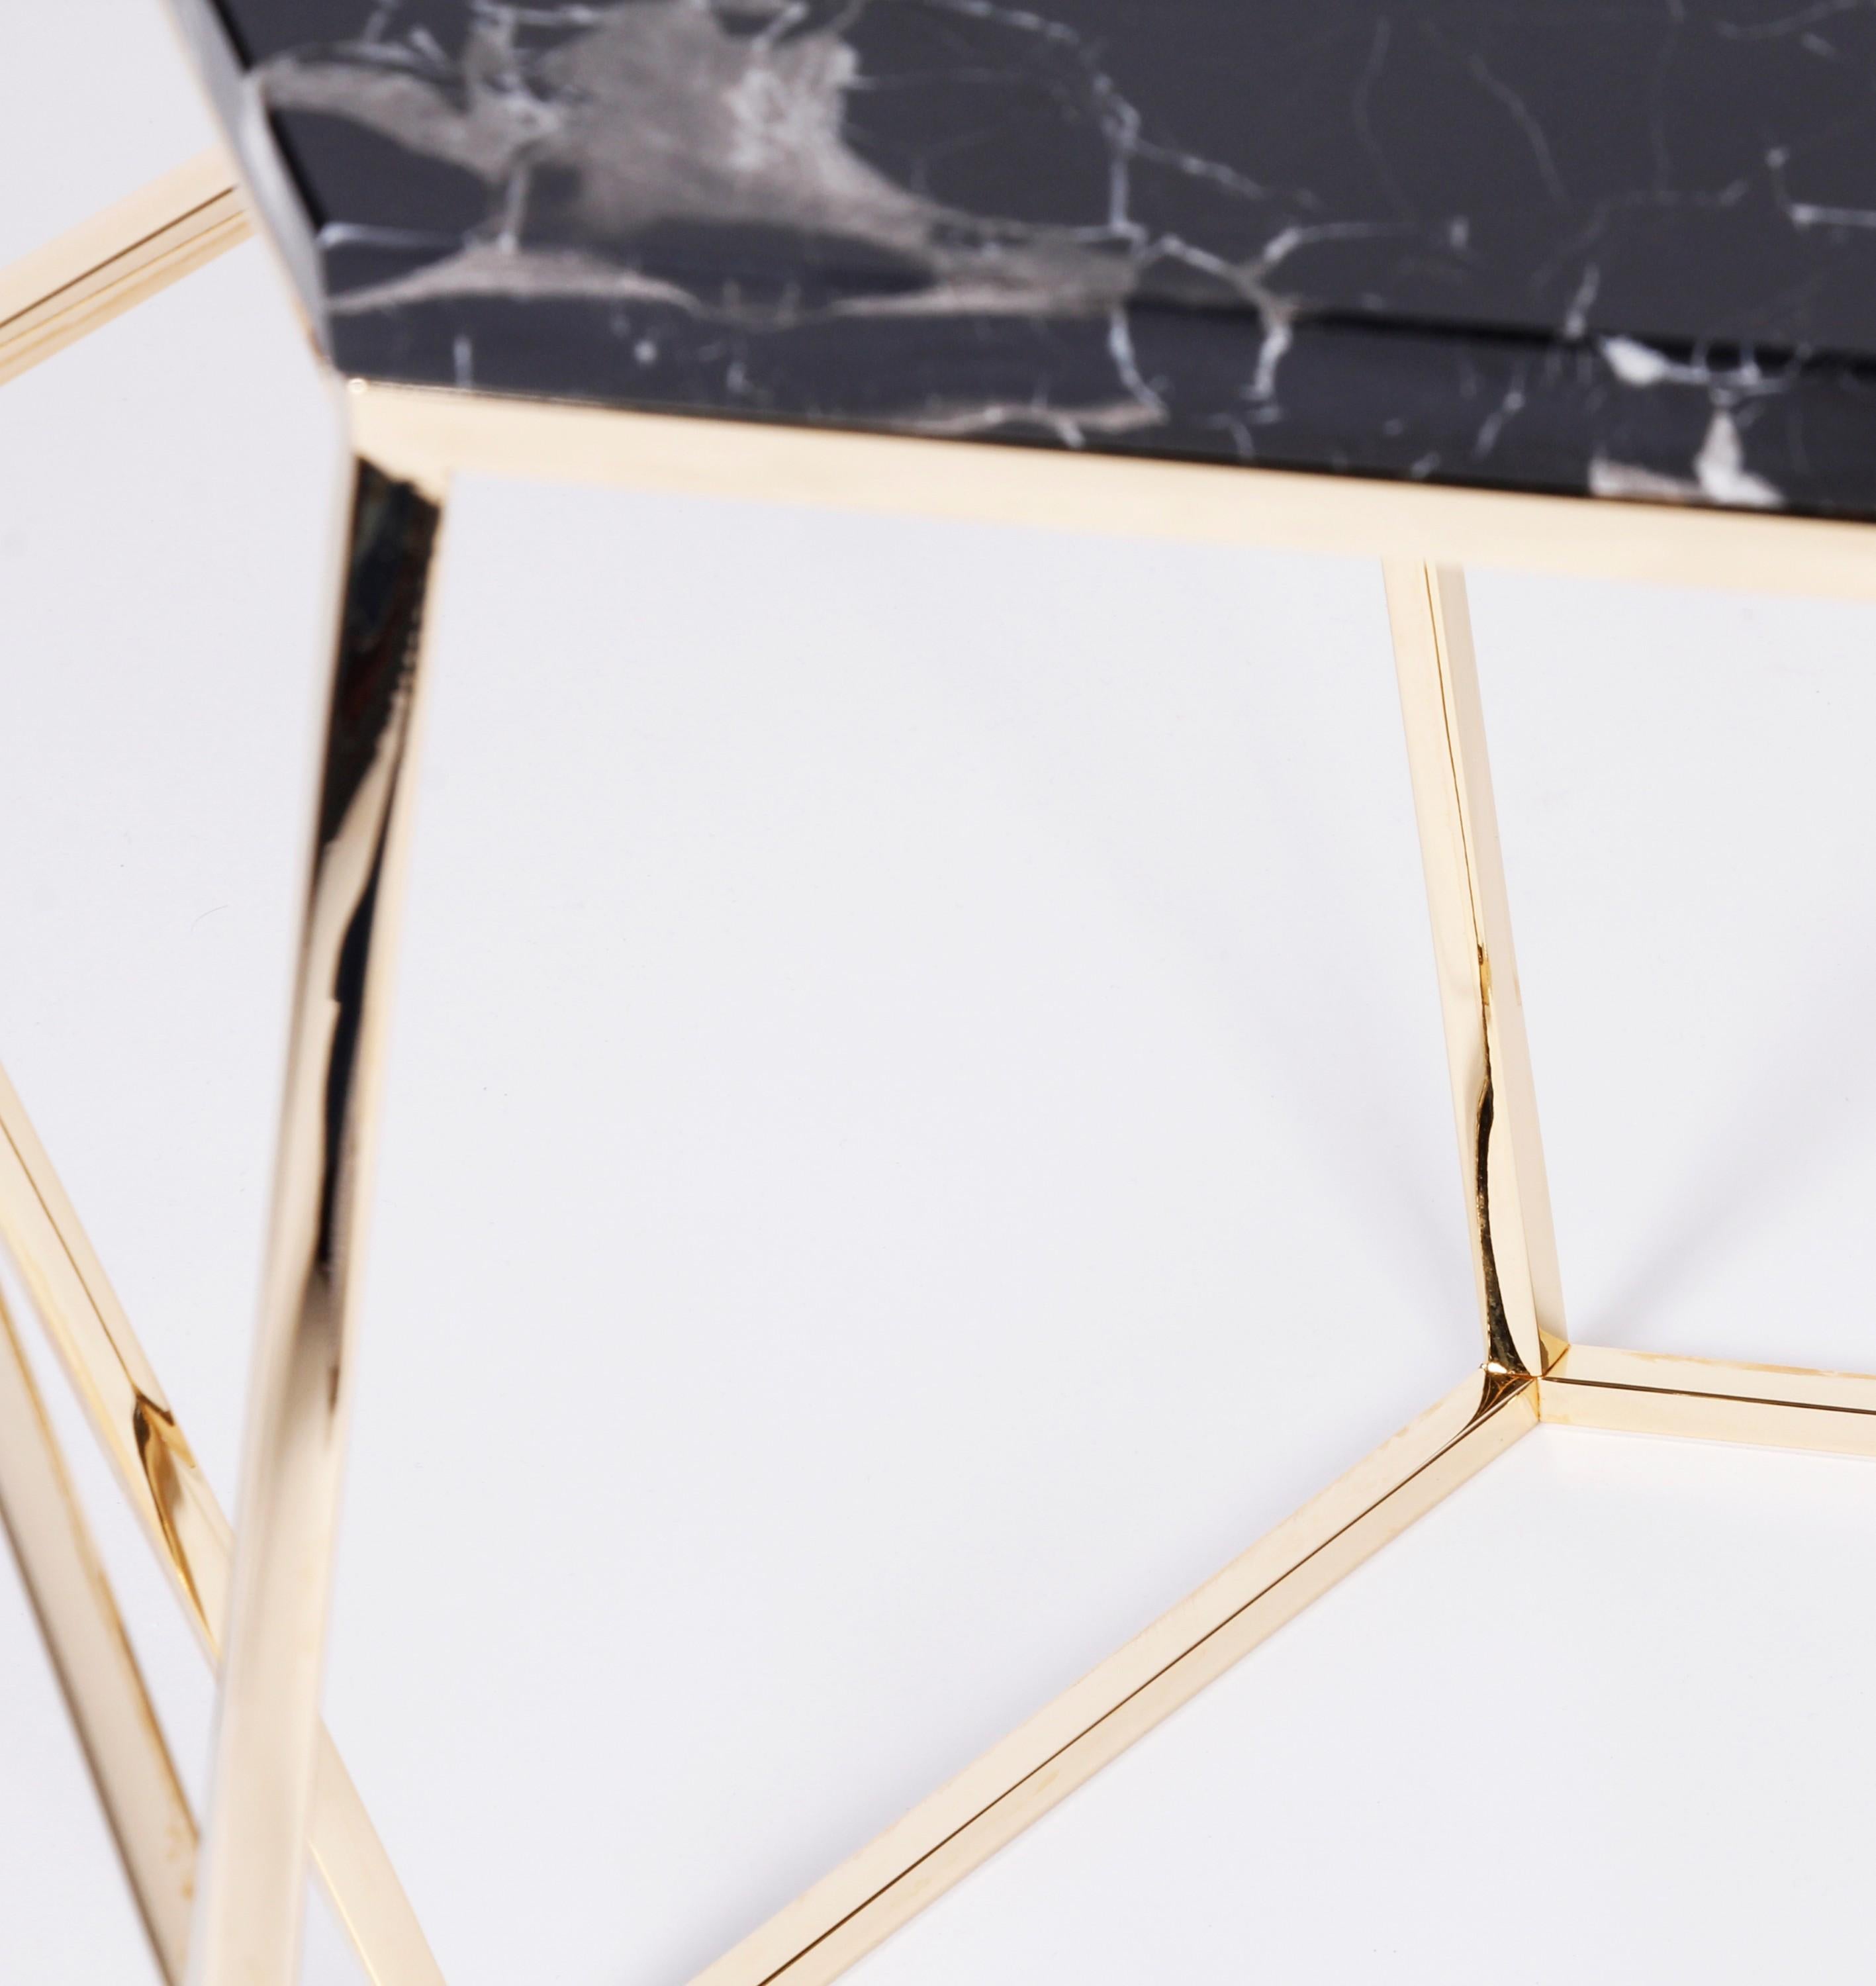 Honeybee side table - Royal Stranger
Dimensions: 52 x 60 x 52 cm
Materials: Black flower marble stone on top of the stainless steel coated in brass structure.

A light metal structure with a touch of gold that supports a shaped luxurious